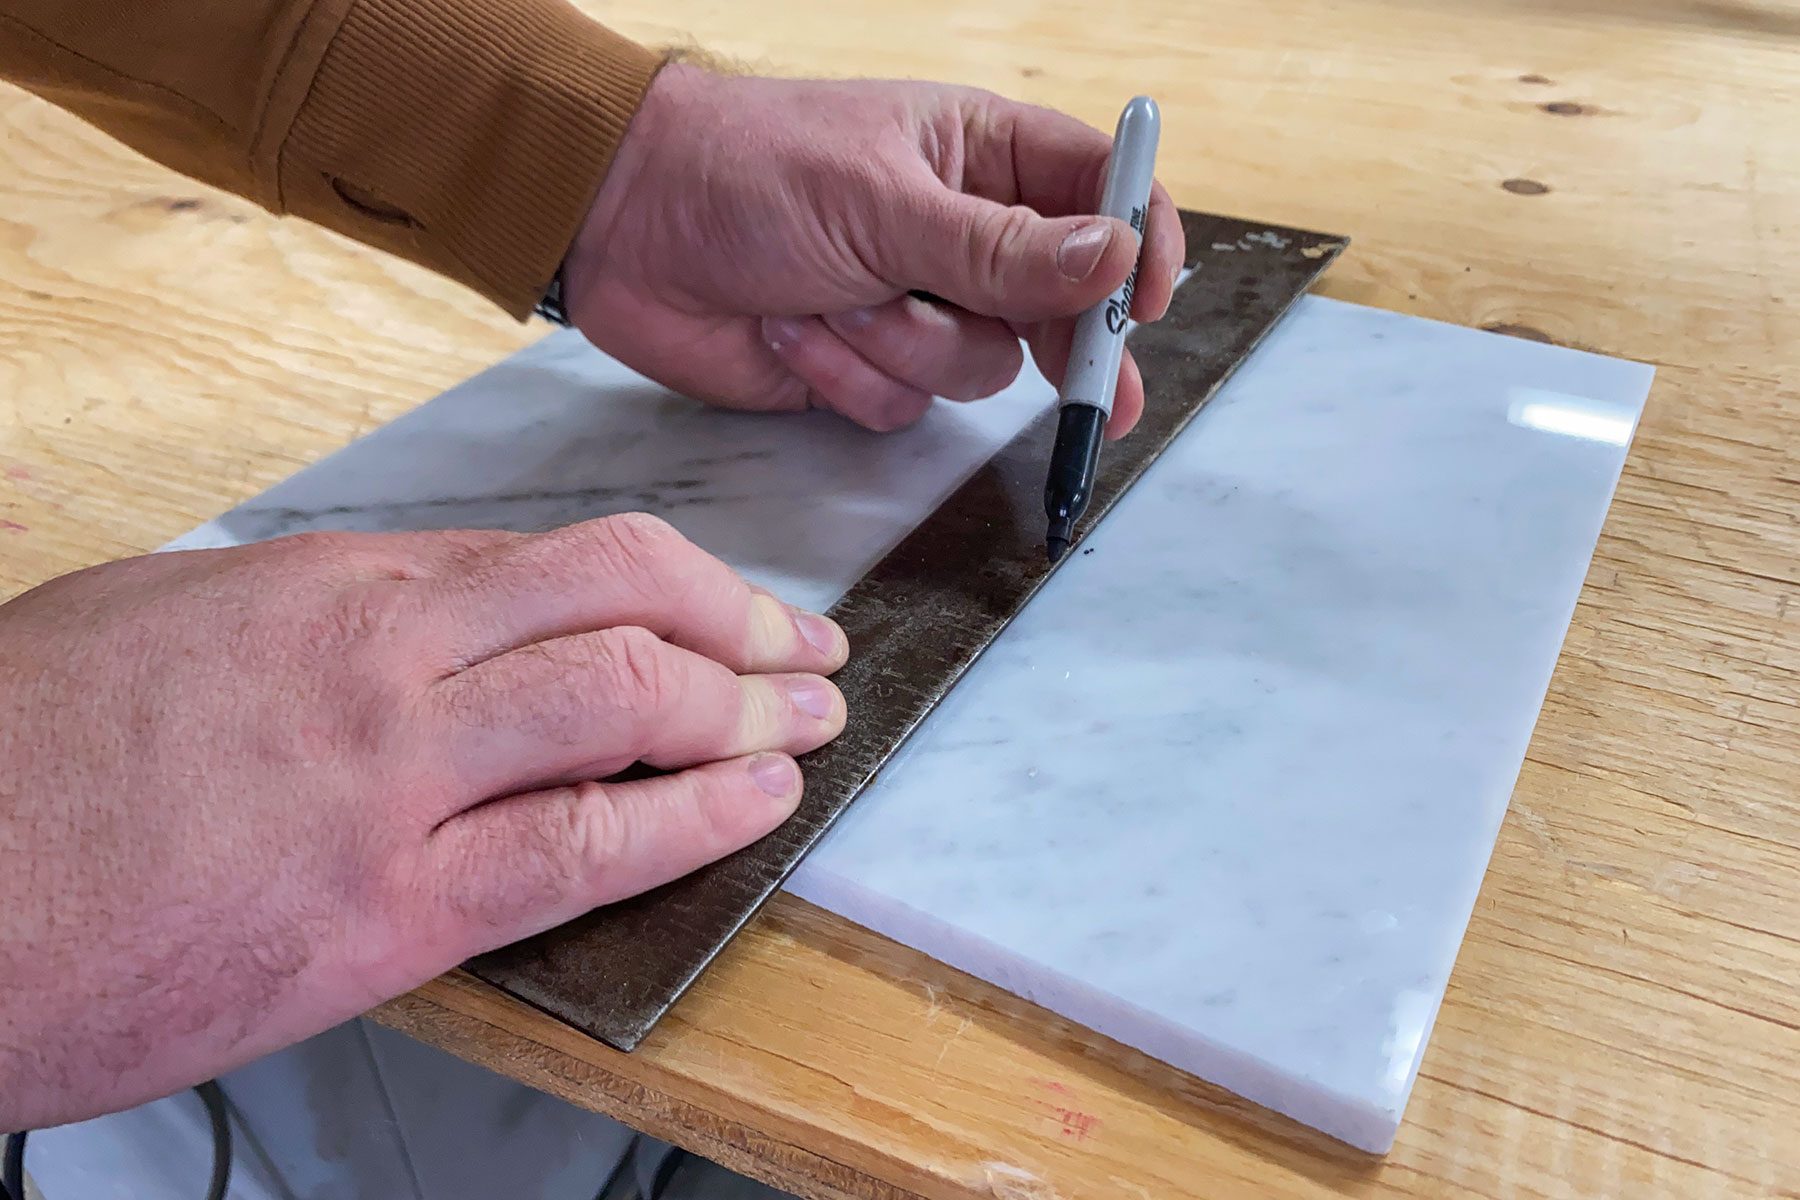 Measuring and marking the marble with scale and marker